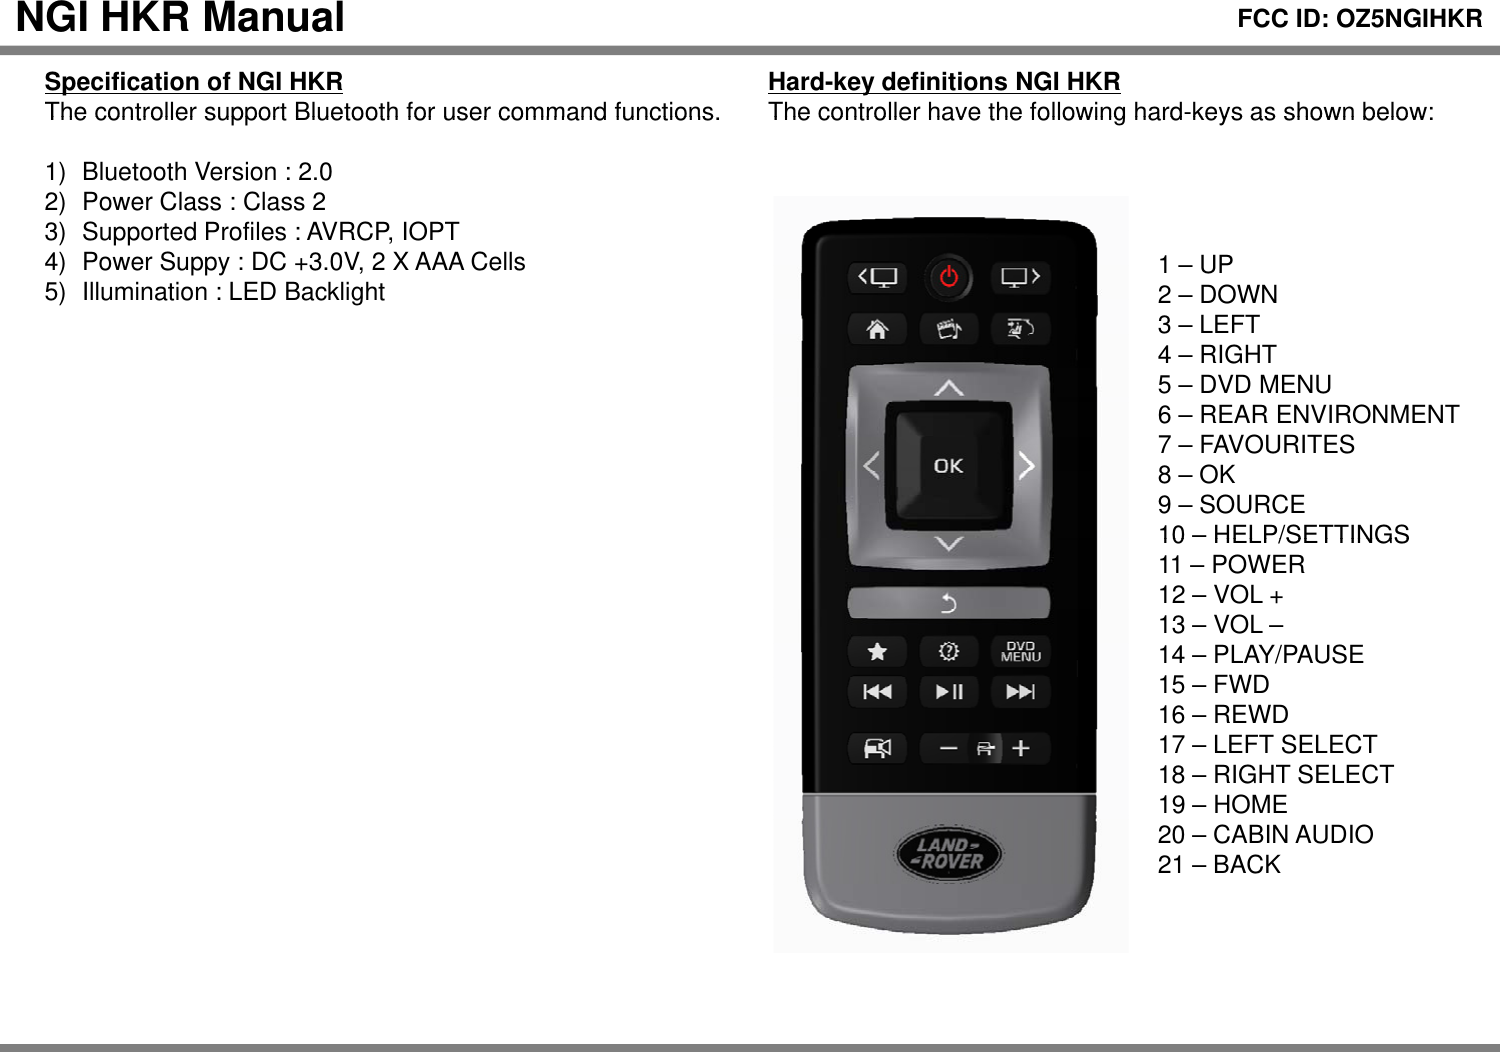 Hard-key definitions NGI HKRThecontrollerhavethe followinghard-keys as shown below:NGI HKR Manual Specification of NGI HKRThe controllersupportBluetoothforuser command functionsFCC ID: OZ5NGIHKRThe controller have the following hardkeys as shown below:1UPThe controller support Bluetooth for user command functions. 1) Bluetooth Version : 2.02) Power Class : Class 23) Supported Profiles : AVRCP, IOPT4)PowerSuppy: DC +3 0V 2 X AAA Cells1 –UP2 – DOWN3 – LEFT4 – RIGHT5 –DVD MENU4)Power Suppy: DC +3.0V, 2 X AAA Cells5) Illumination : LED Backlight6 – REAR ENVIRONMENT7 – FAVOURITES8 – OK9 – SOURCE10–HELP/SETTINGS10 HELP/SETTINGS11 – POWER12 – VOL +13 – VOL –14 – PLAY/PAUSE15FWD15 –FWD16 – REWD17 – LEFT SELECT18 – RIGHT SELECT19 – HOME20 – CABIN AUDIO21 – BACK